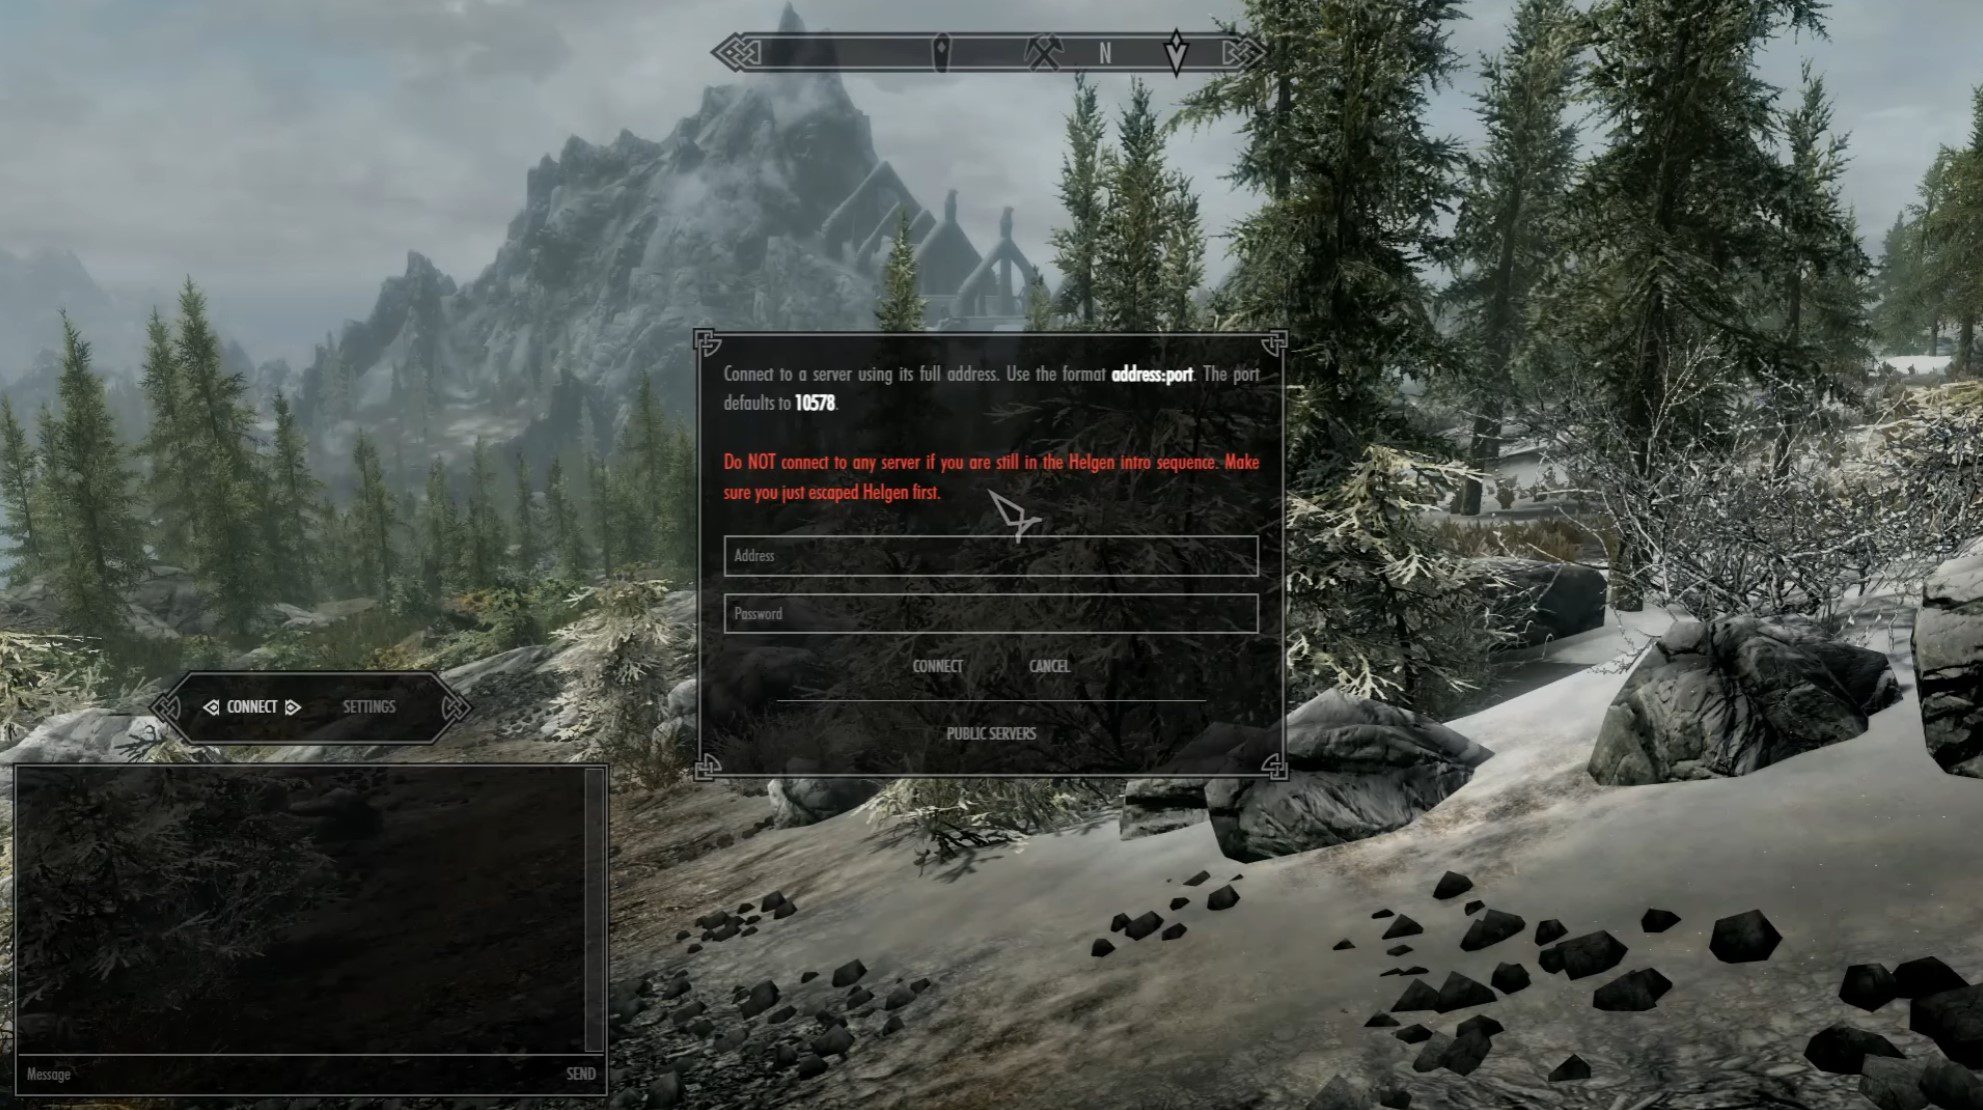 Connect to the Skyrim Together server.